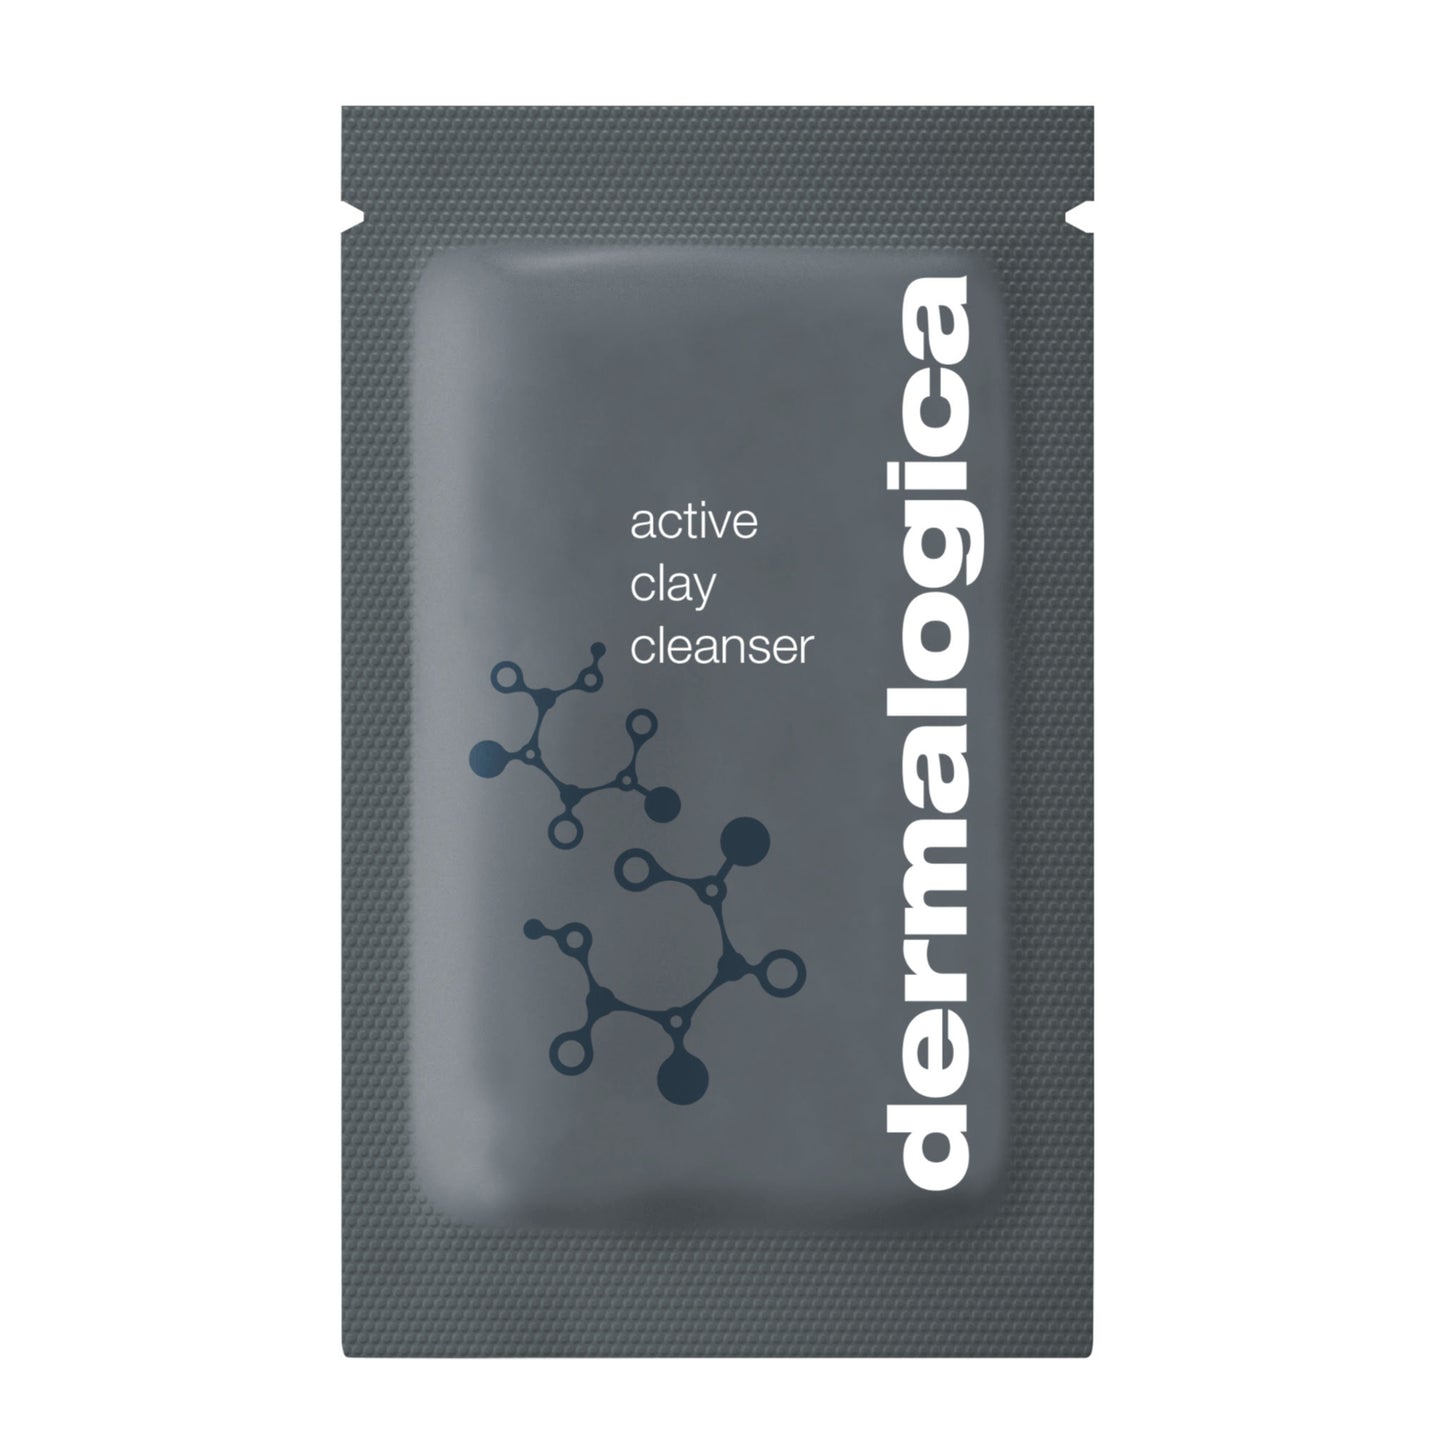 active clay cleanser - sample